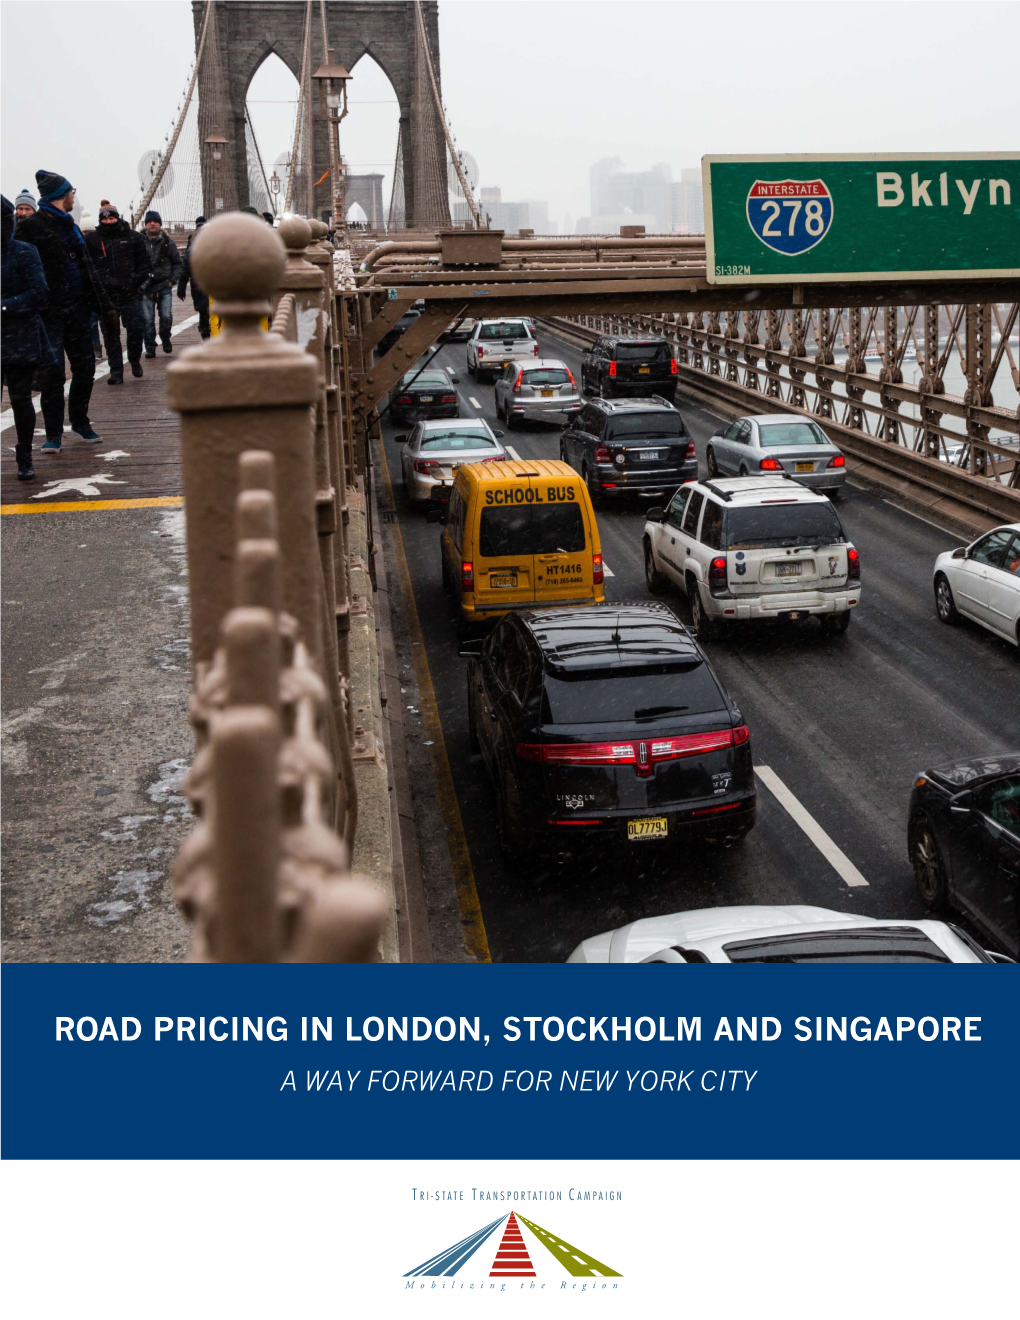 Road Pricing in London, Stockholm and Singapore a Way Forward for New York City Introduction